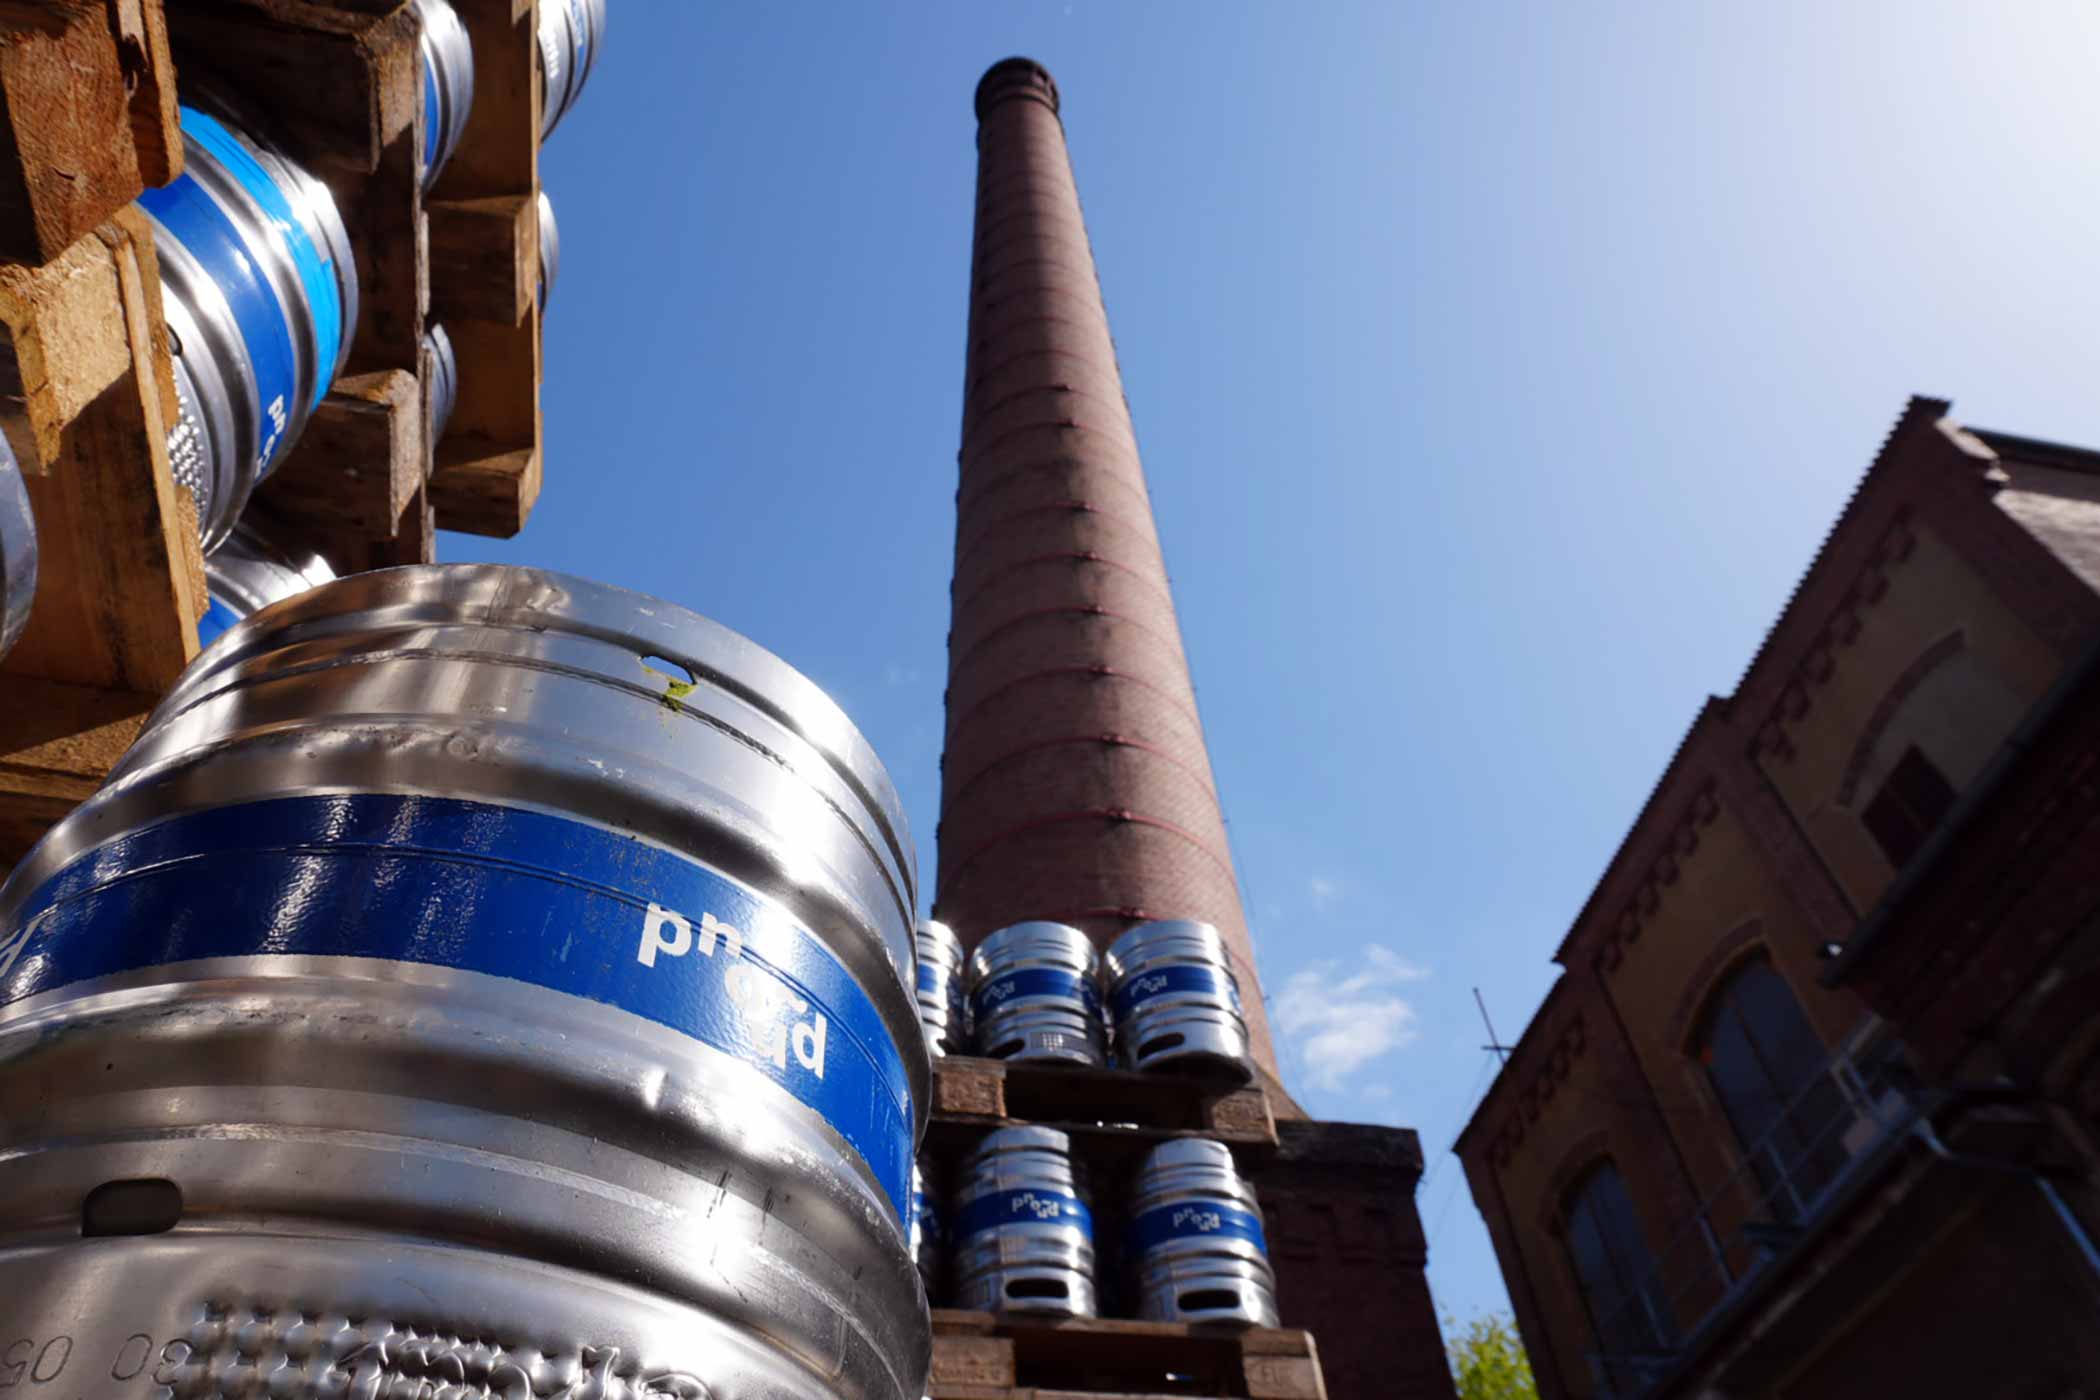 Pivovar Proud: The Electrifying, Experimental Brewery at Pilsner Urquell